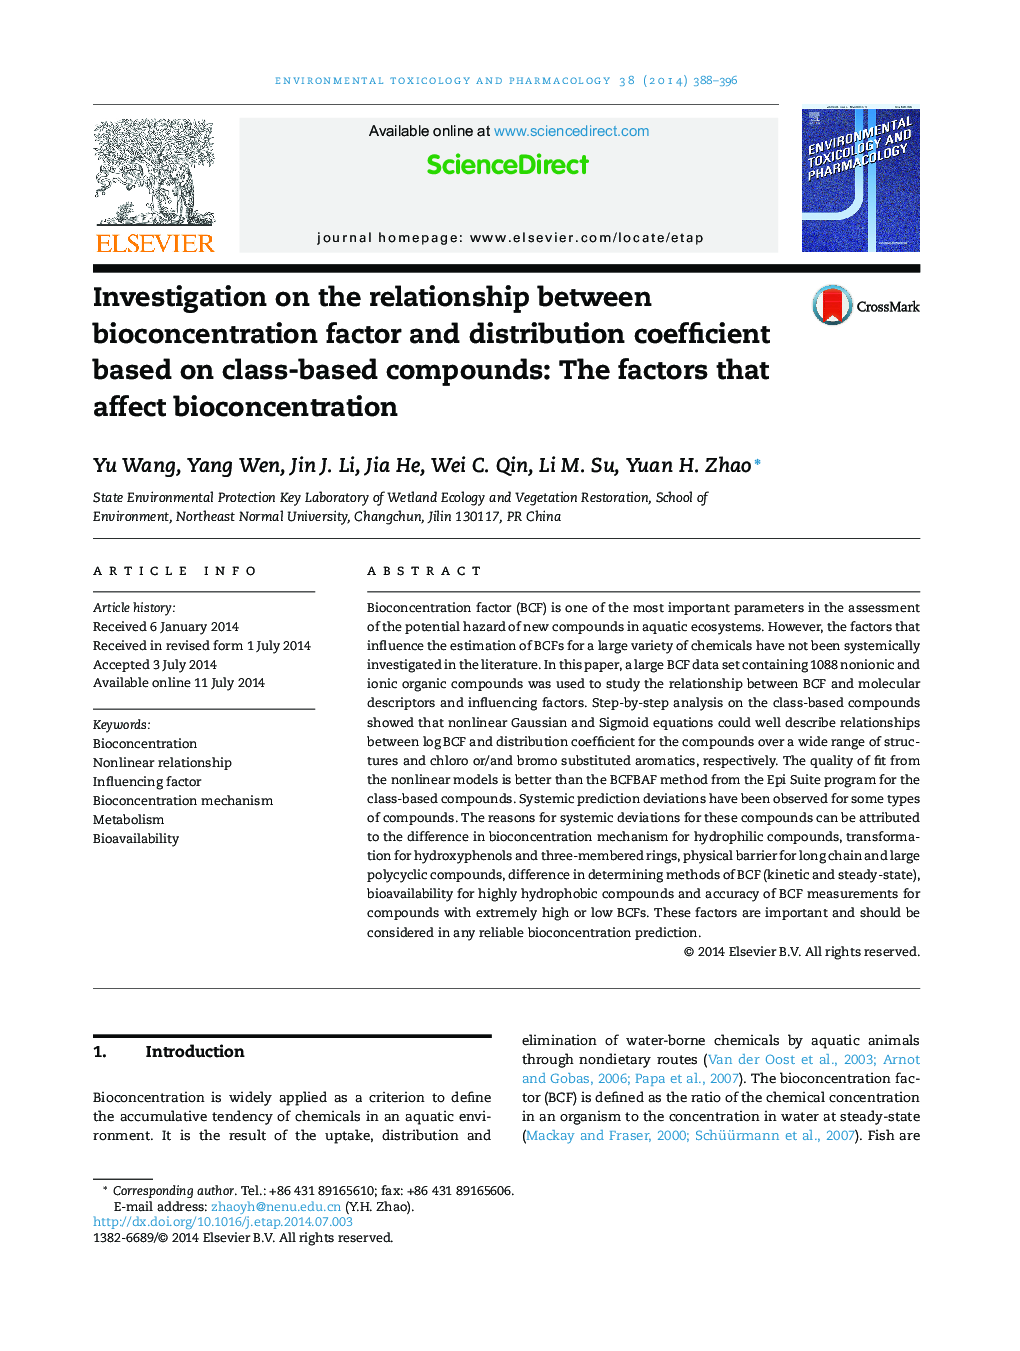 Investigation on the relationship between bioconcentration factor and distribution coefficient based on class-based compounds: The factors that affect bioconcentration